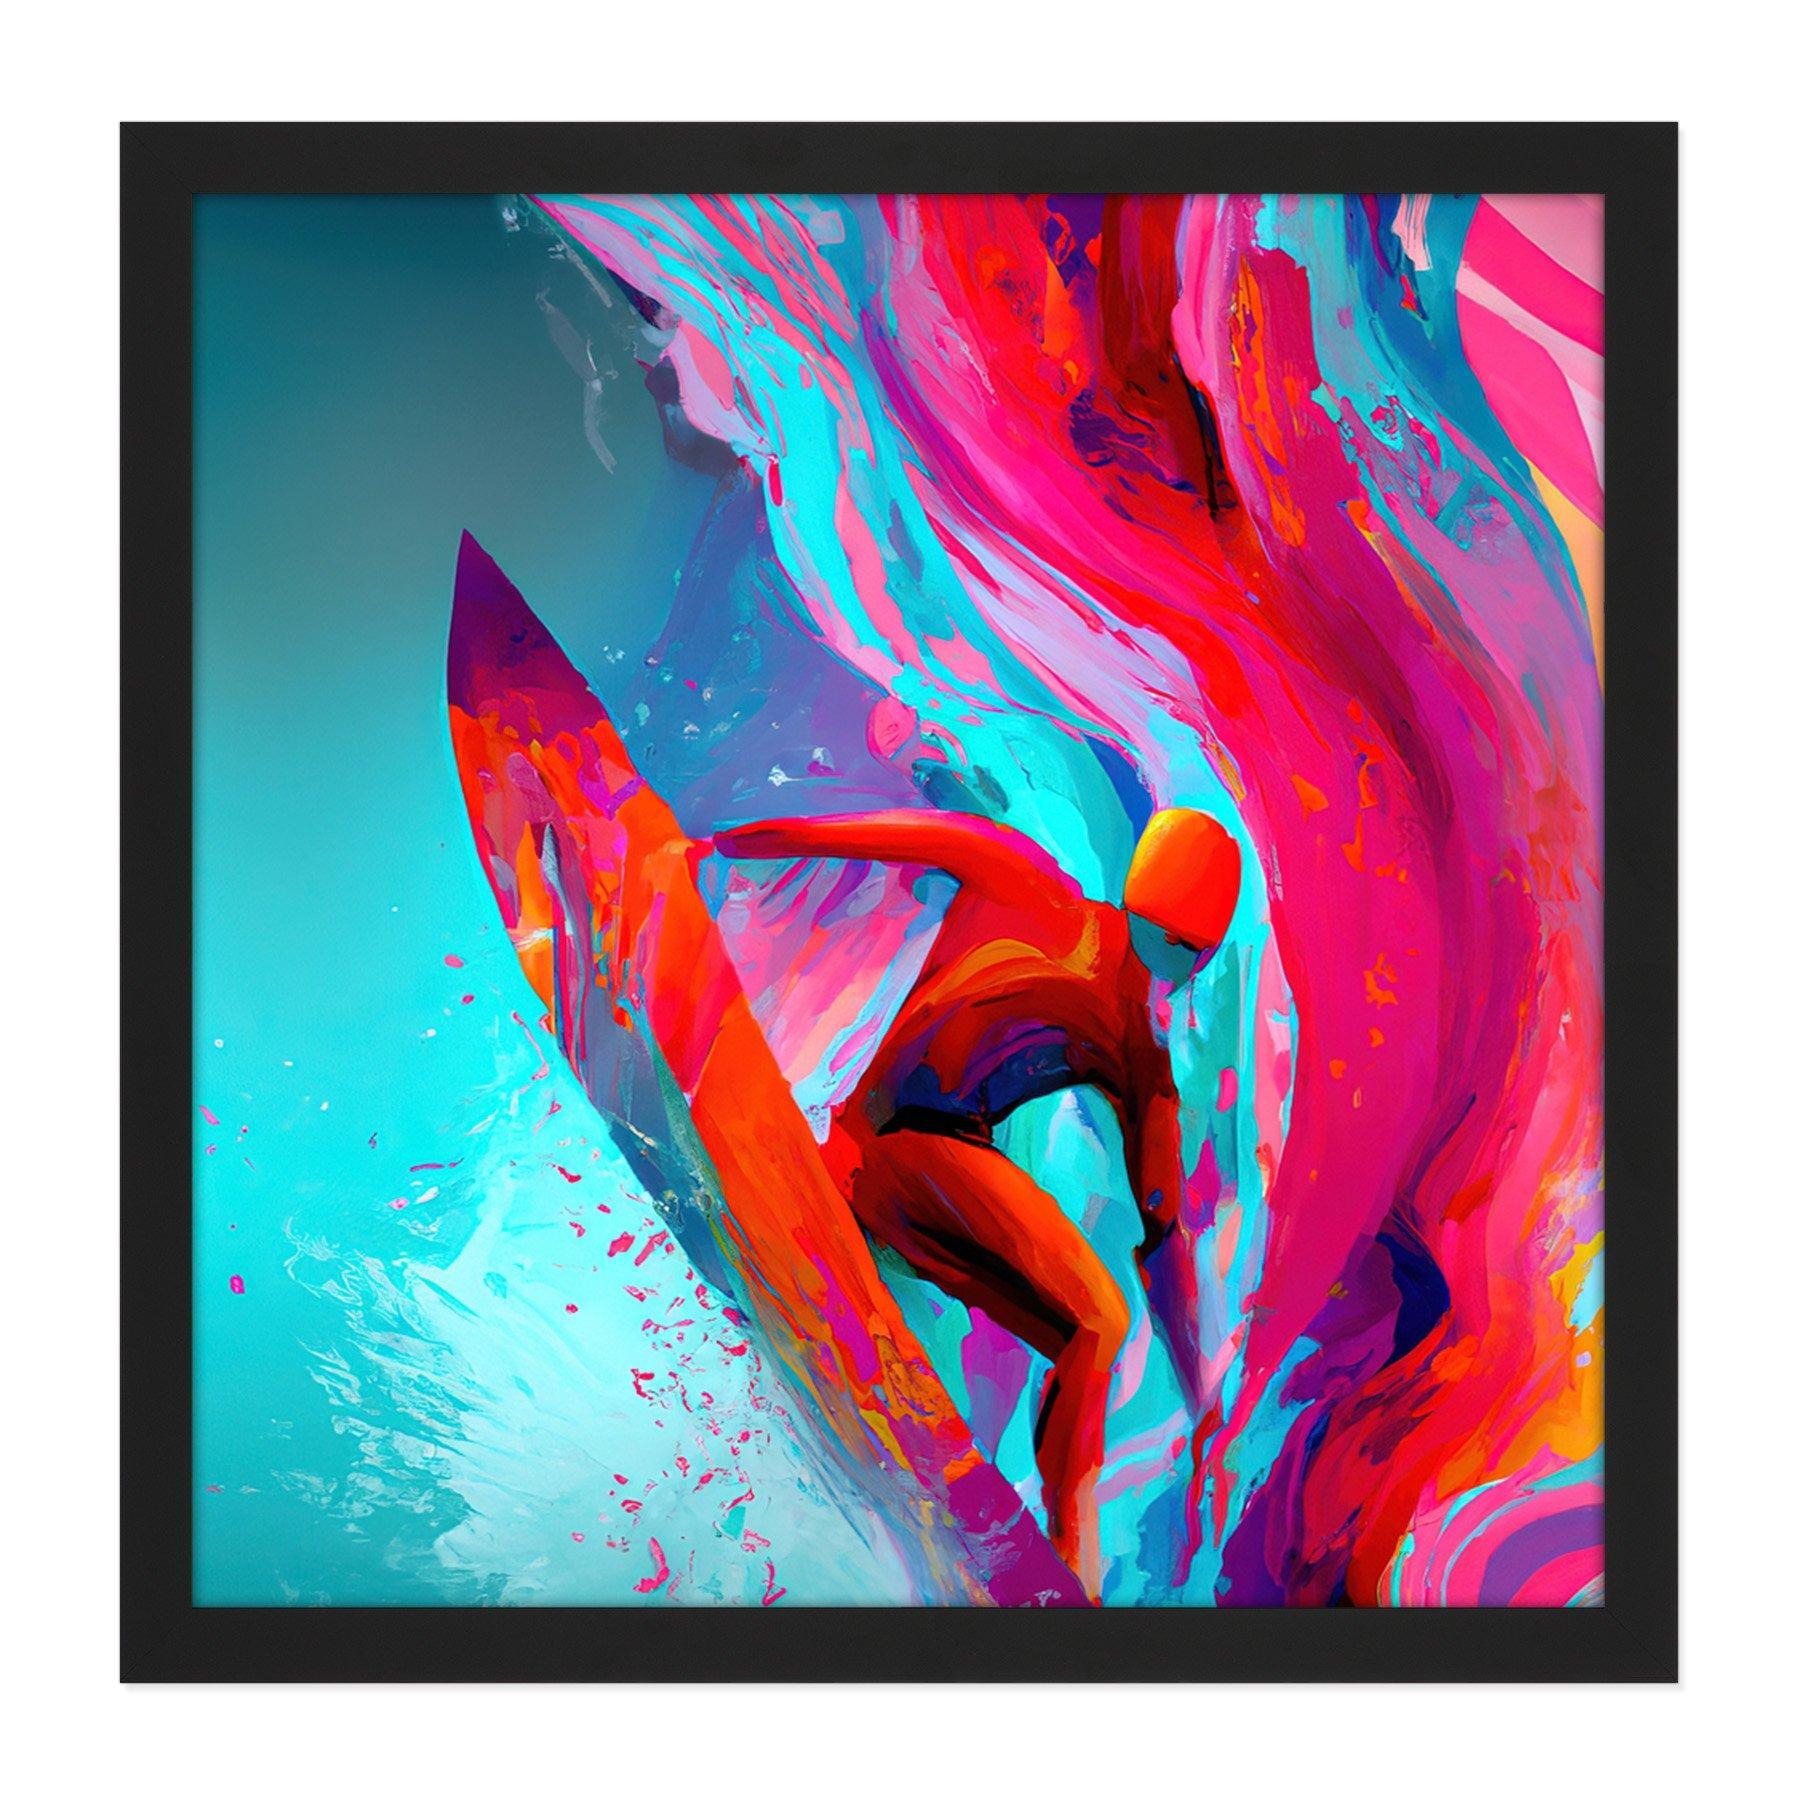 Surfer Riding Wave Sea Abstract Vibrant Bright Watercolour Surfing Pink Turquoise Water Sport Square Framed Wall Art Print Picture 16X16 Inch - image 1